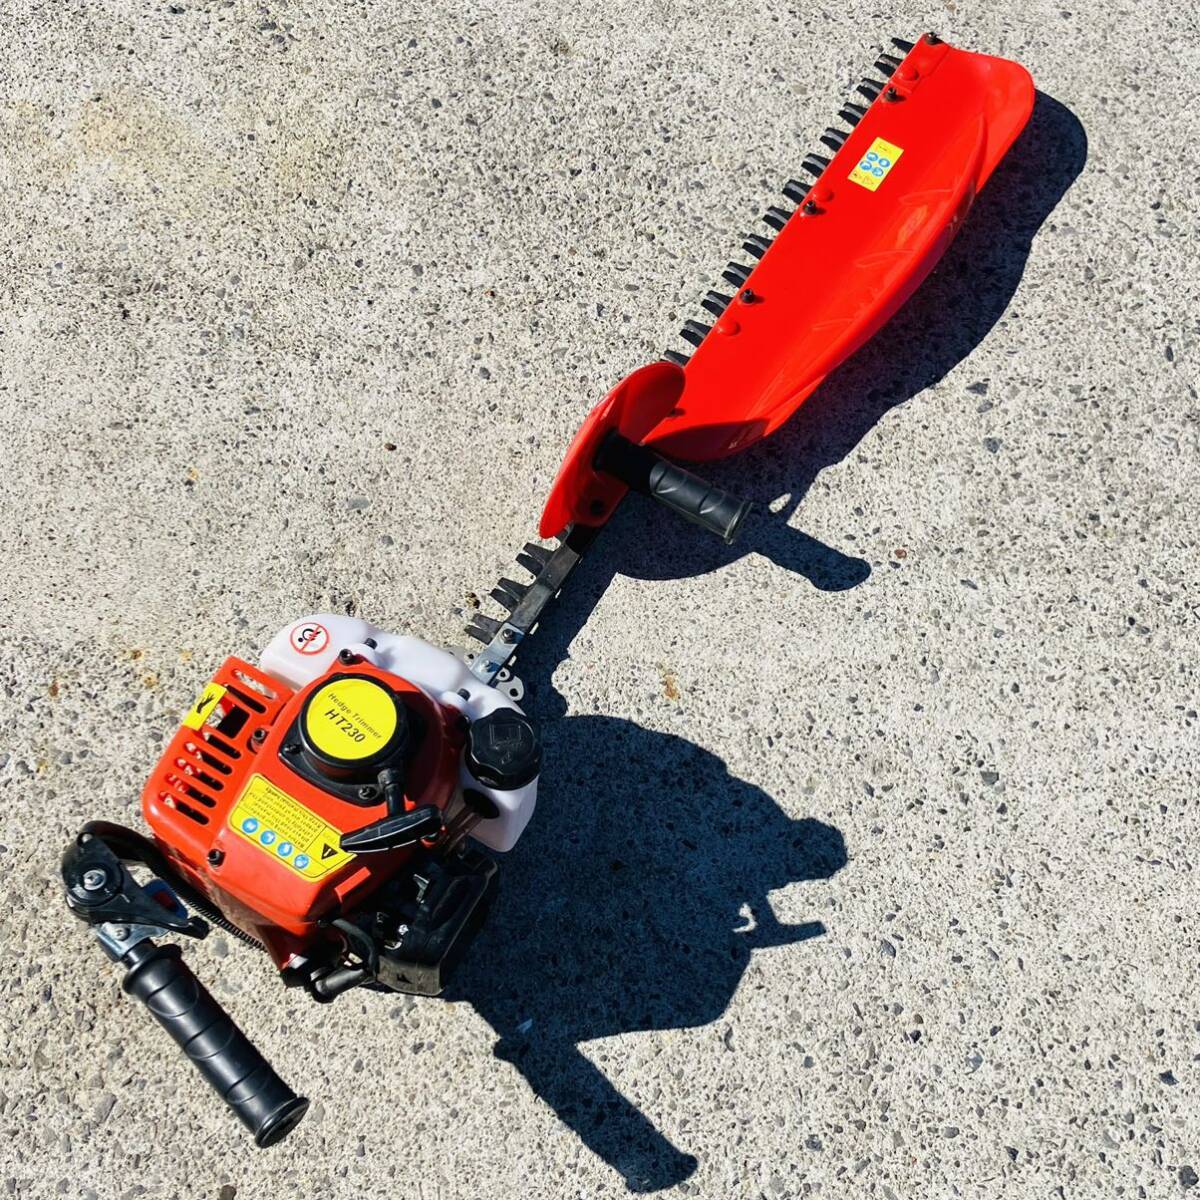  used engine hedge trimmer HT230 abroad made operation verification ending 